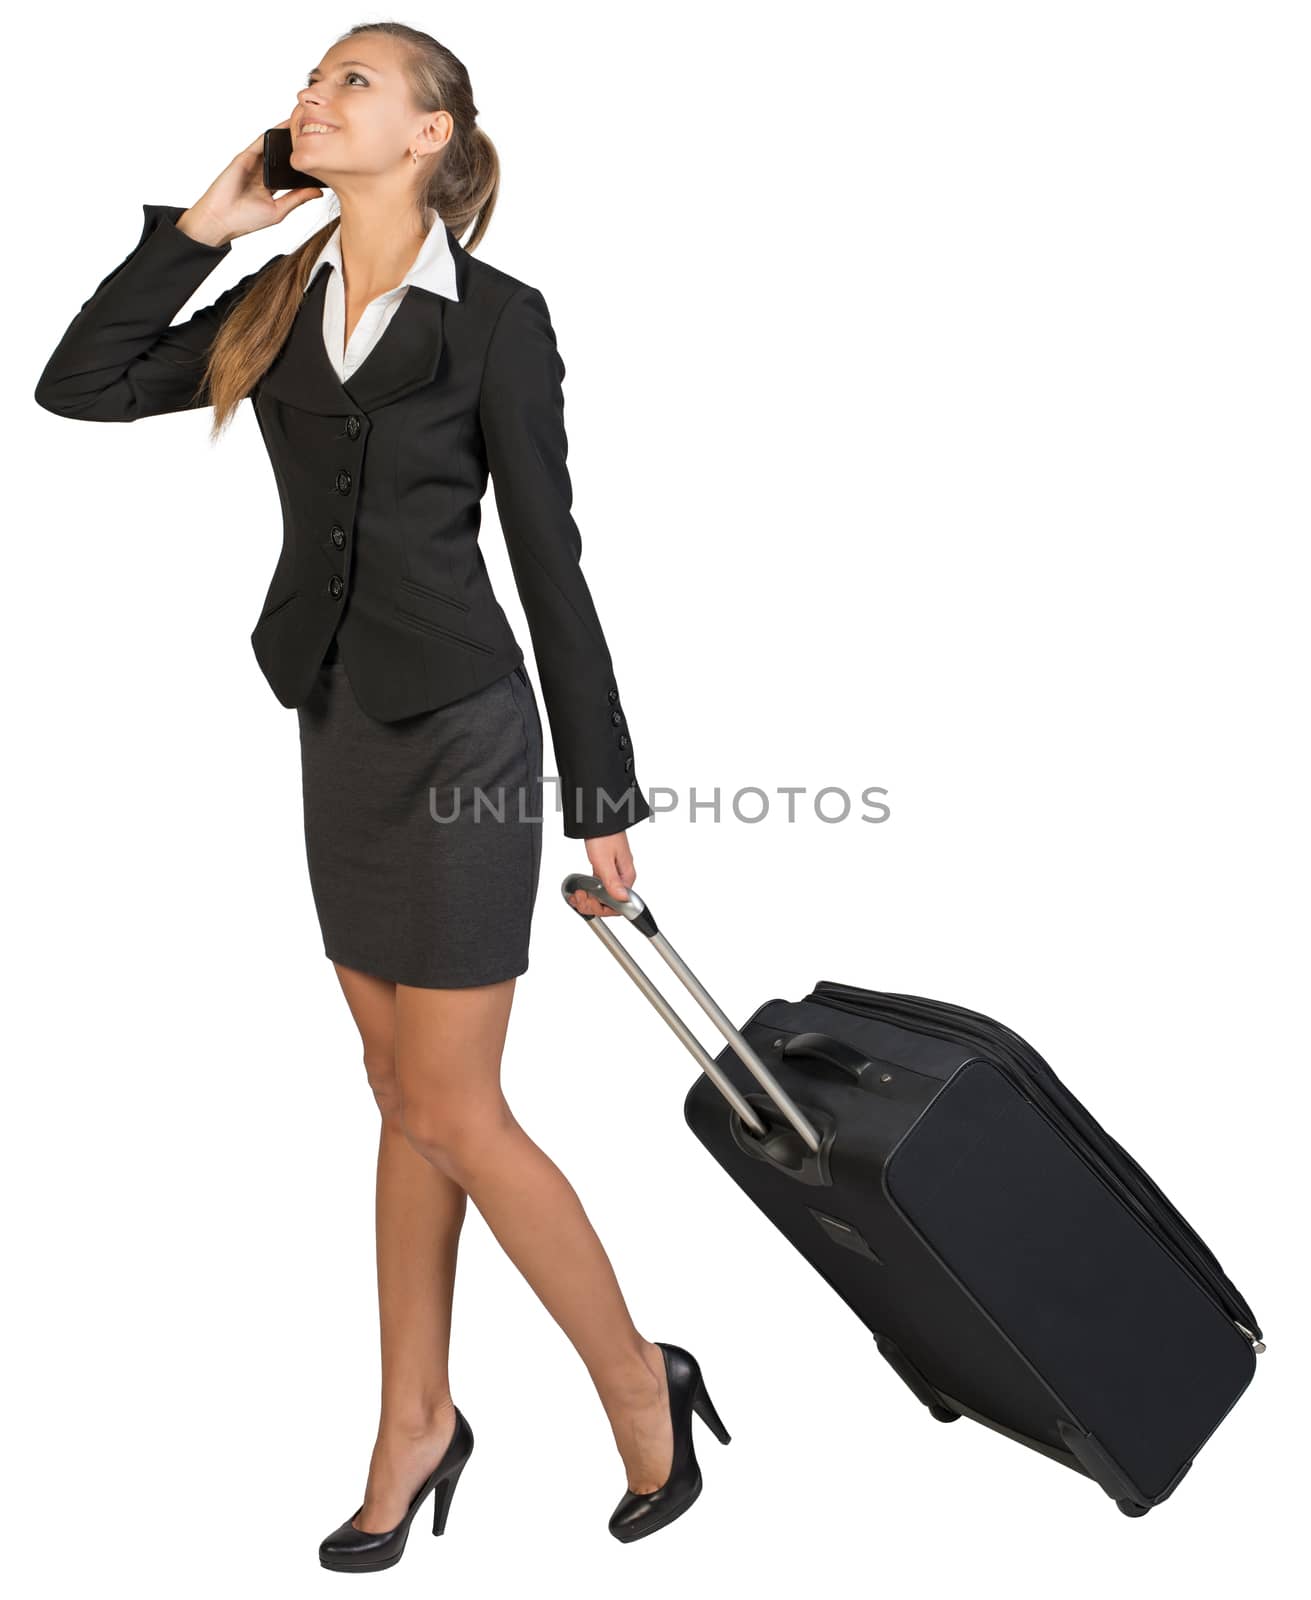 Businesswoman walking with wheeled suitcase, talking on the phone, smiling. Isolated over white background